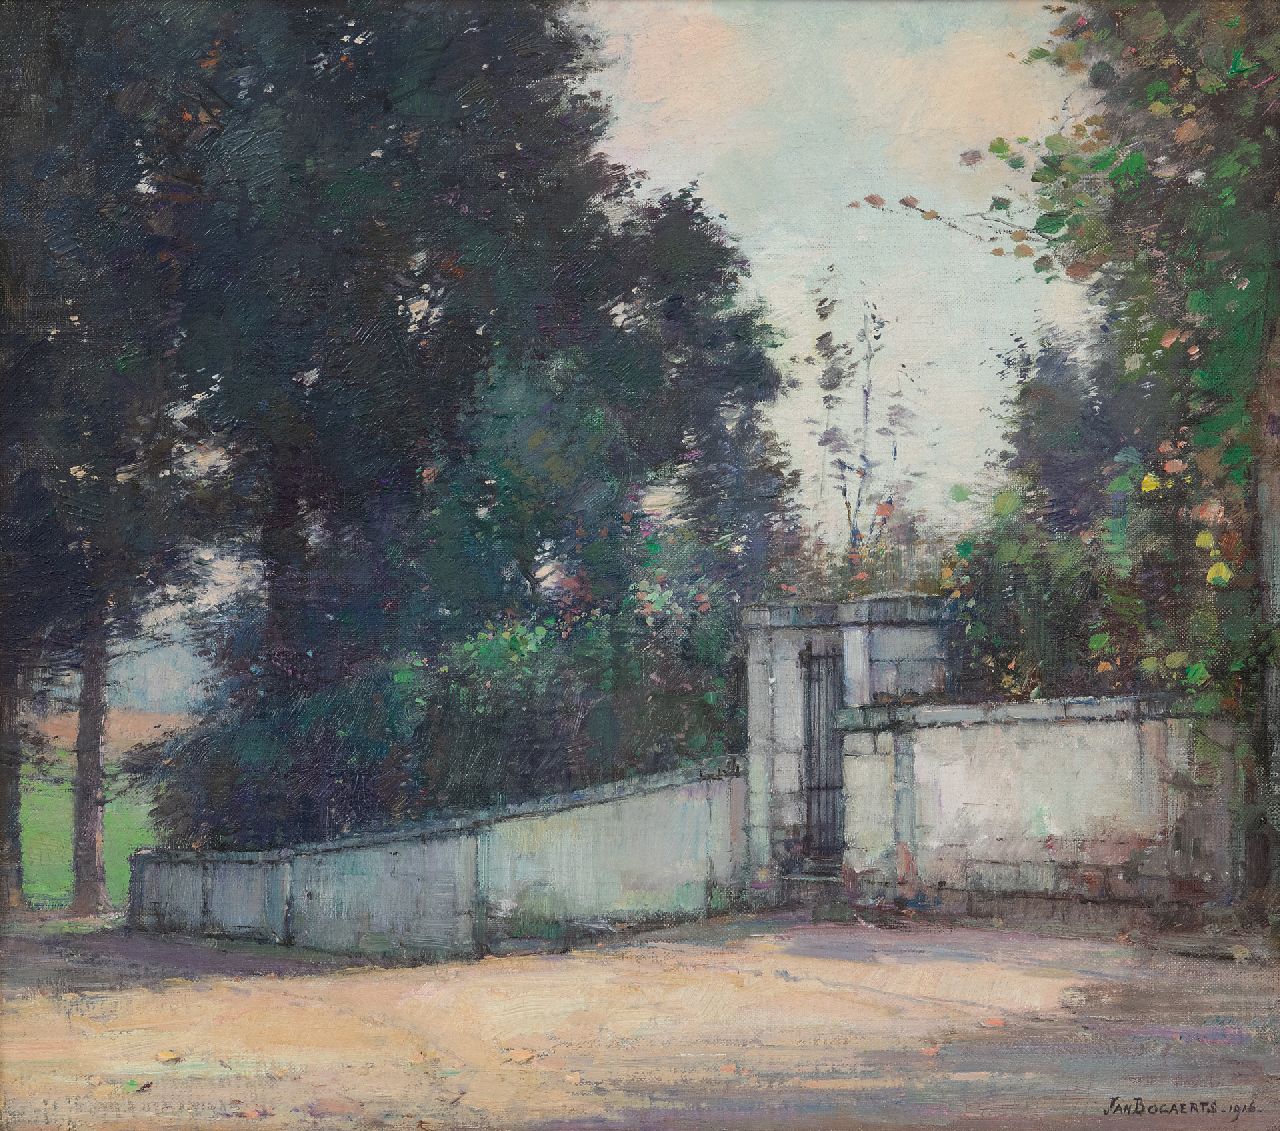 Bogaerts J.J.M.  | Johannes Jacobus Maria 'Jan' Bogaerts | Paintings offered for sale | Garden wall with a gate, oil on canvas 35.1 x 40.0 cm, signed l.r. and dated 1916